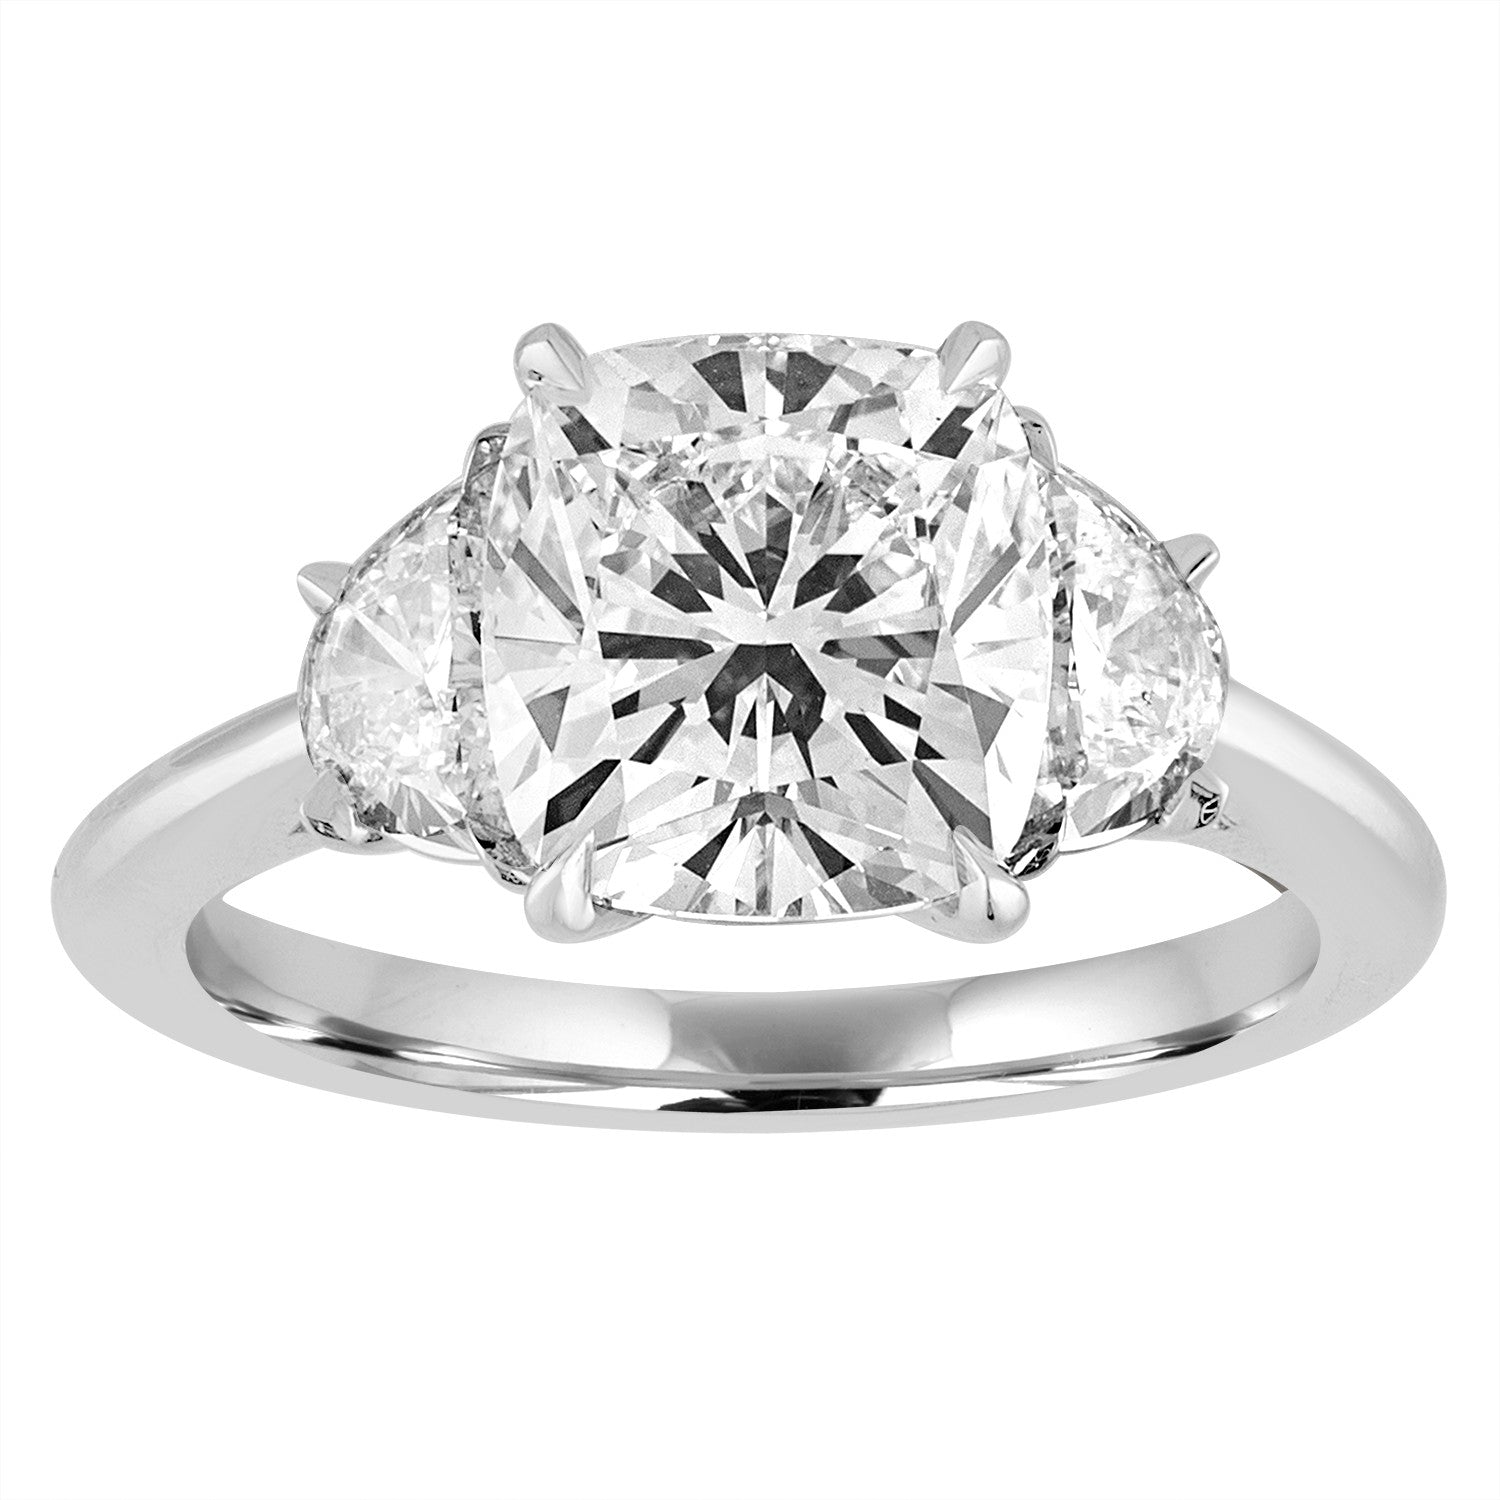 Cushion Cut Engagement Ring with Half Moon Side Stones